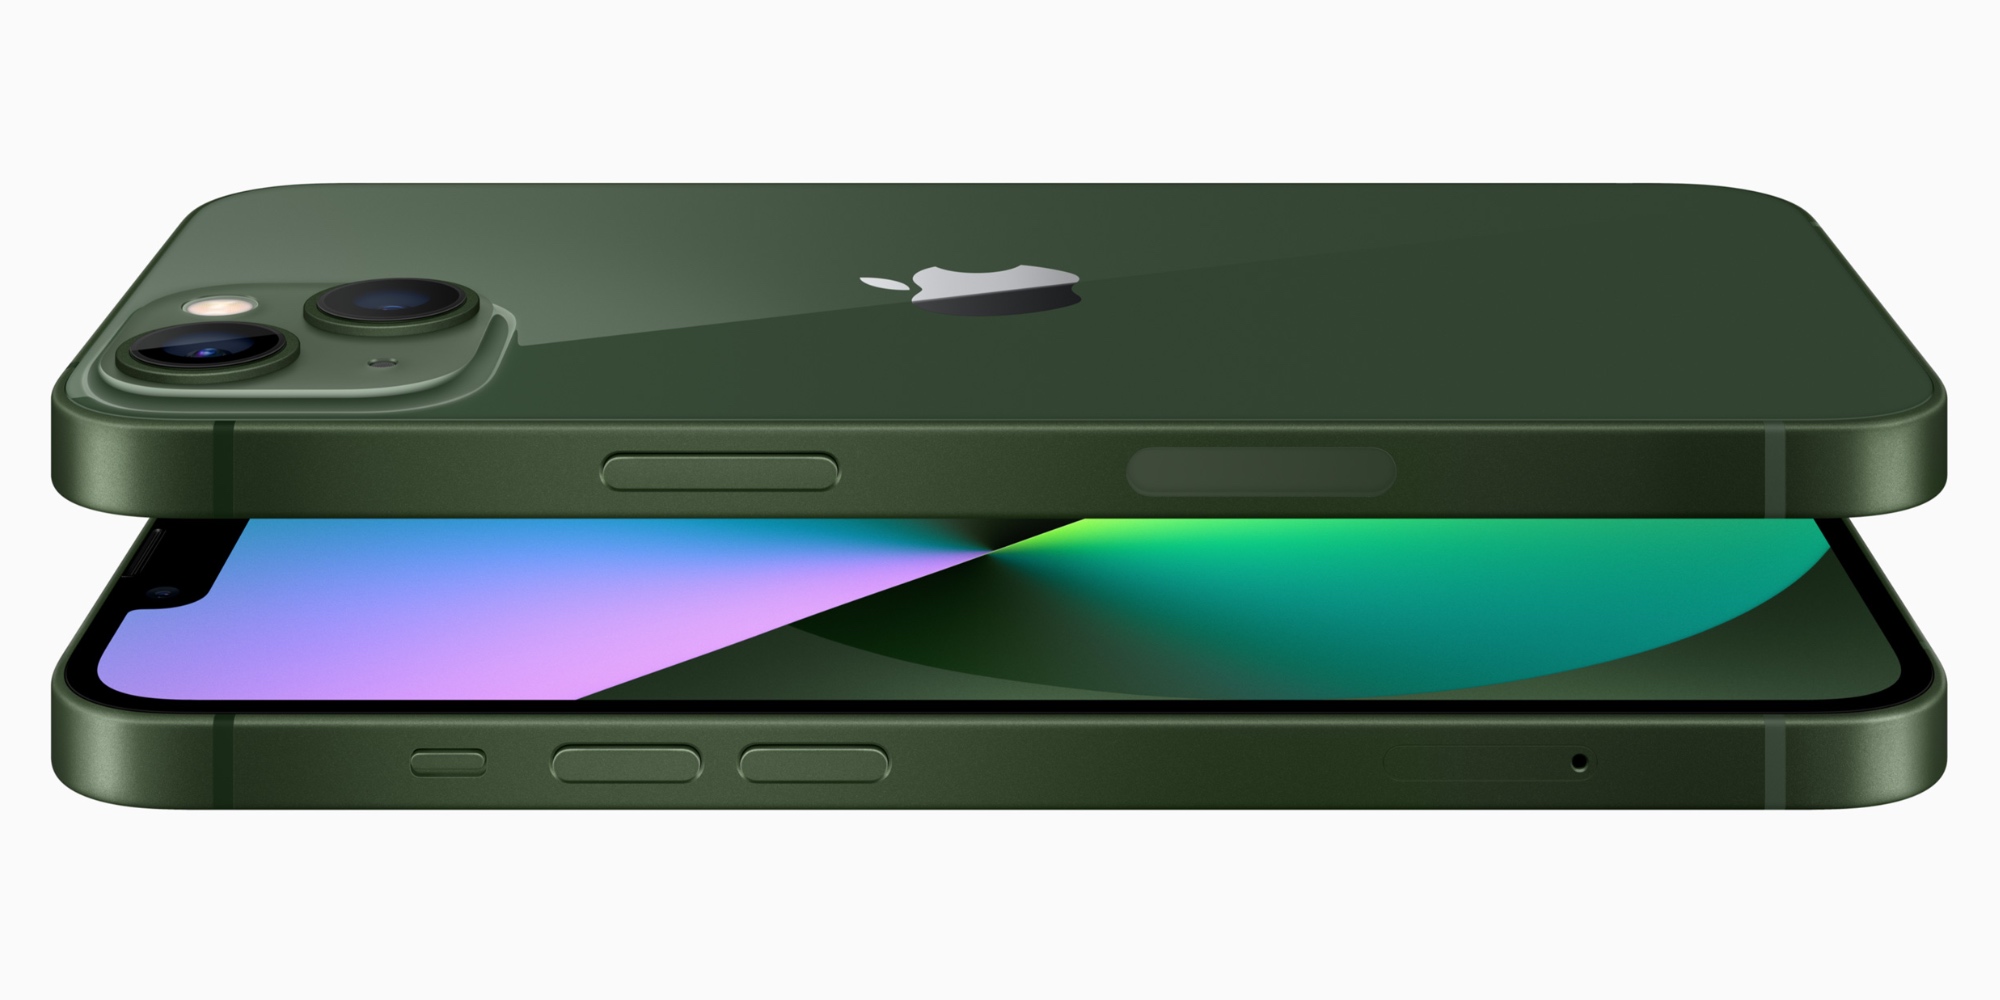 You can now pre-order Apple's new green iPhone 13 and alpine green